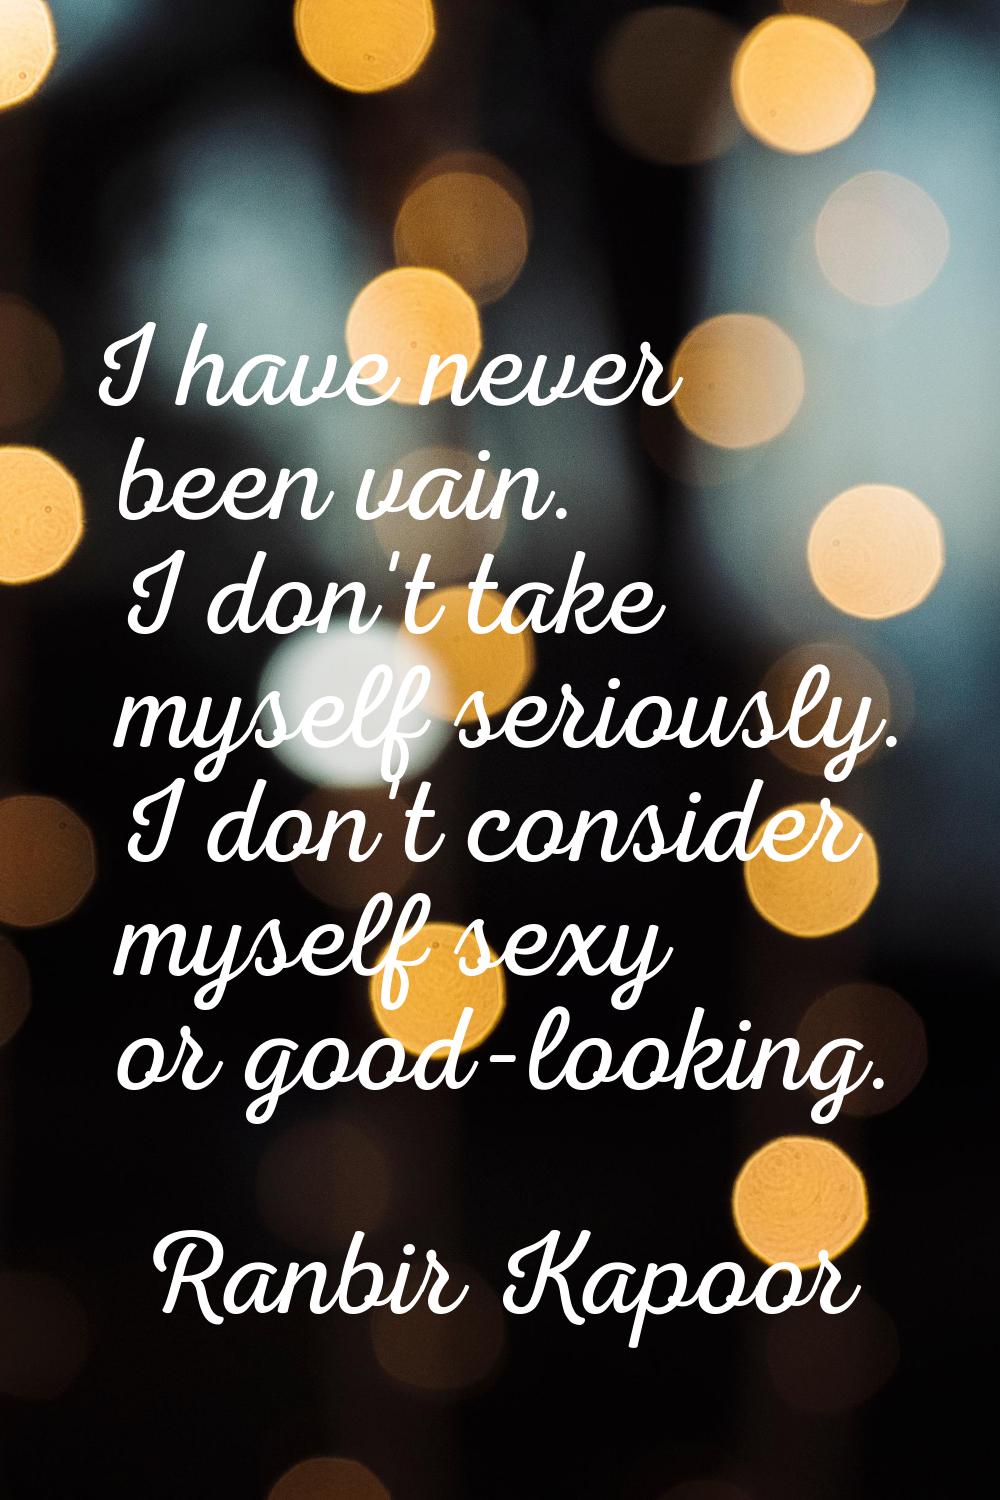 I have never been vain. I don't take myself seriously. I don't consider myself sexy or good-looking